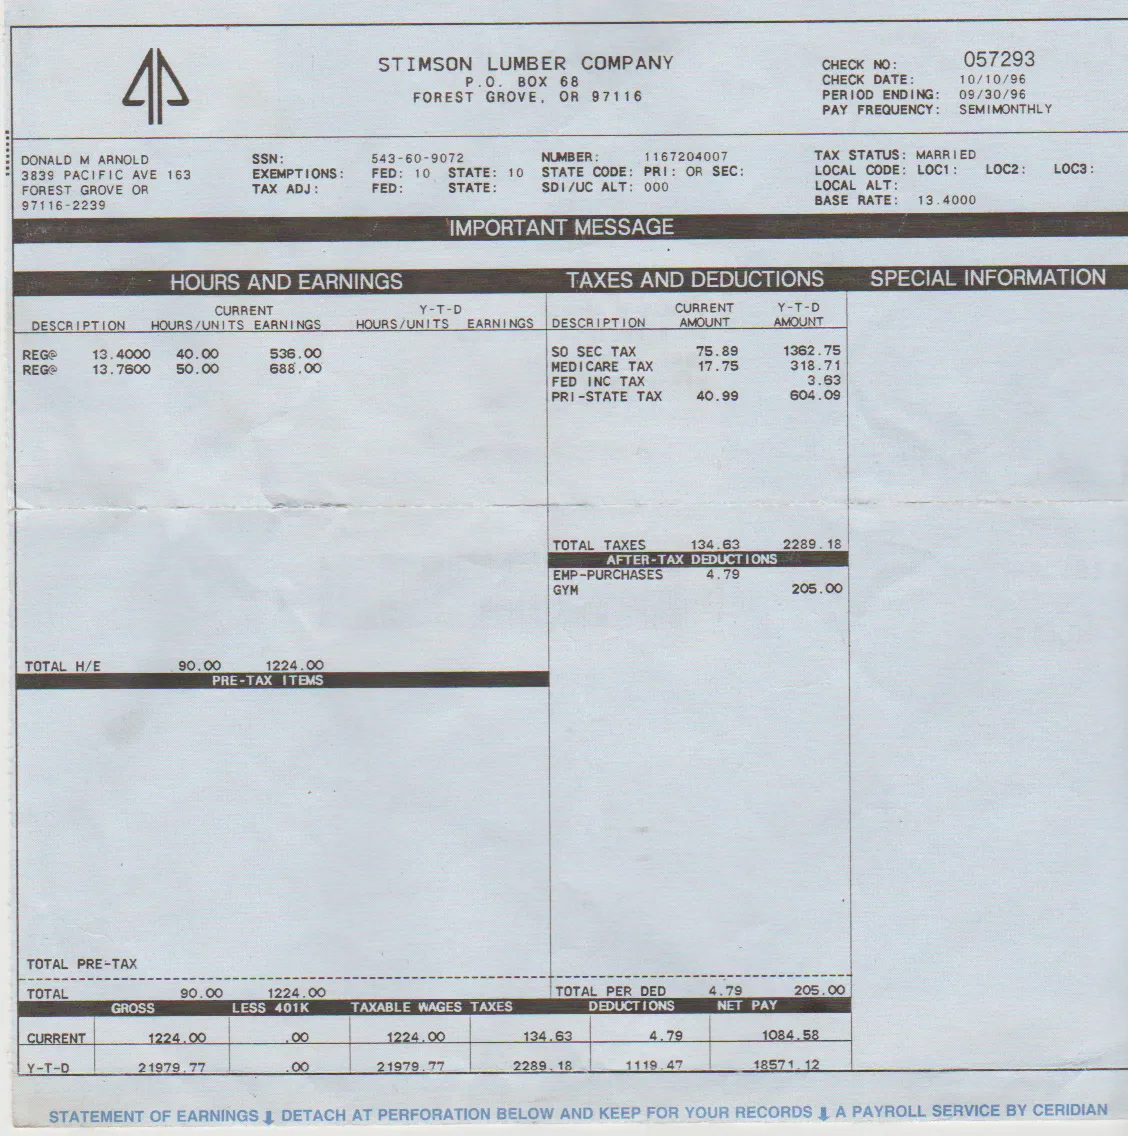 1996-10-10 - Thursday - Don Arnold - Stimson Lumber Company - Statement of Earnings-1.png